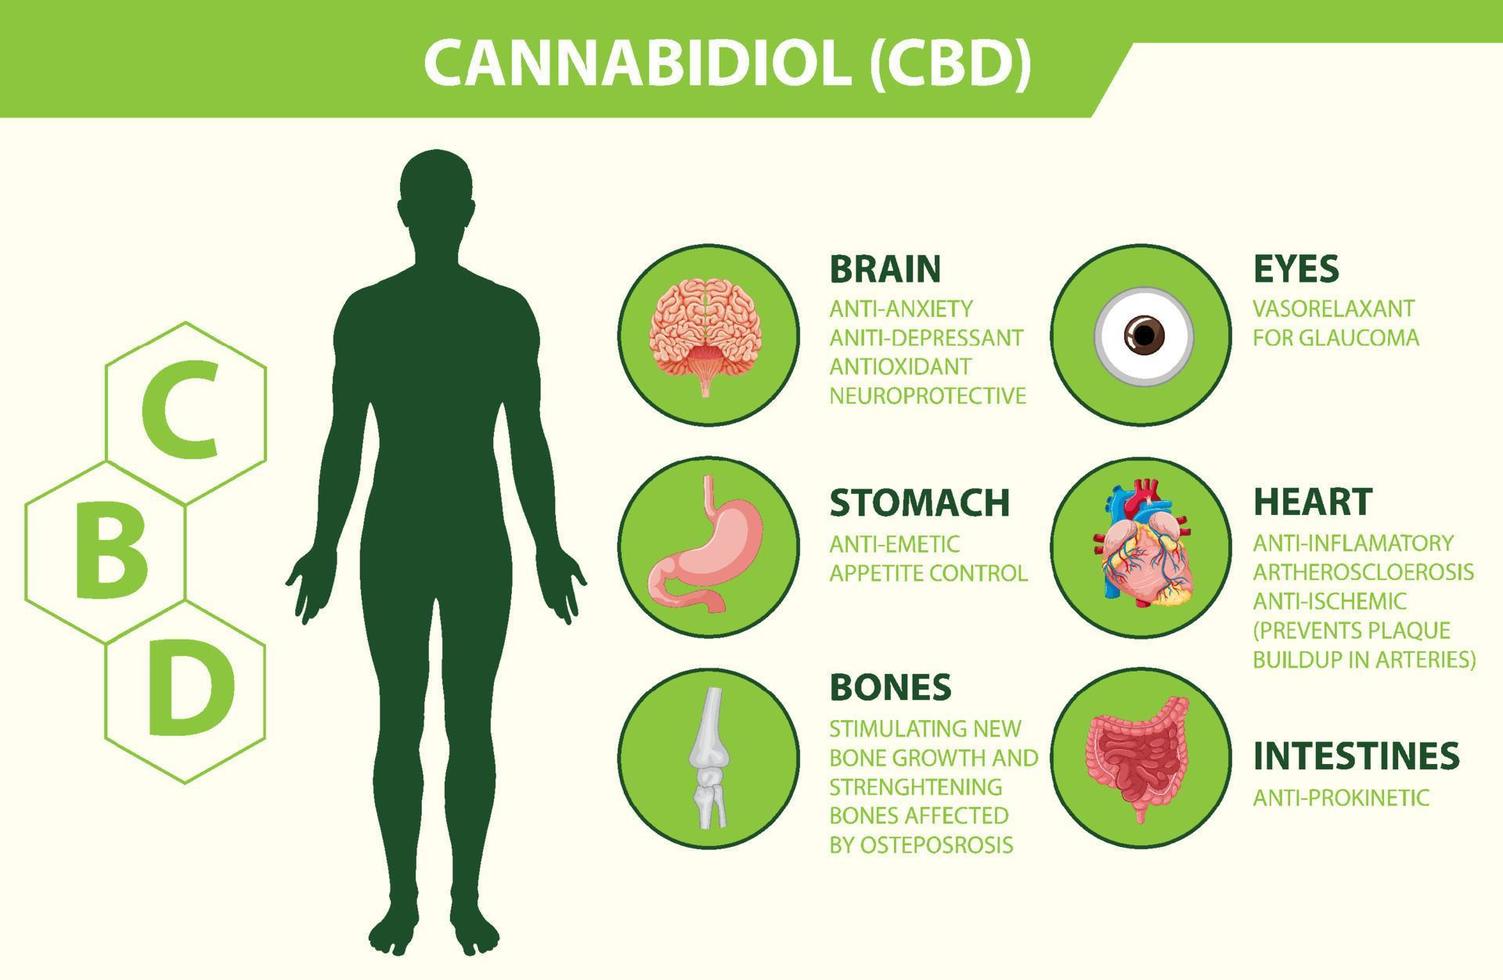 Benefits of CBD for physical health diagram vector